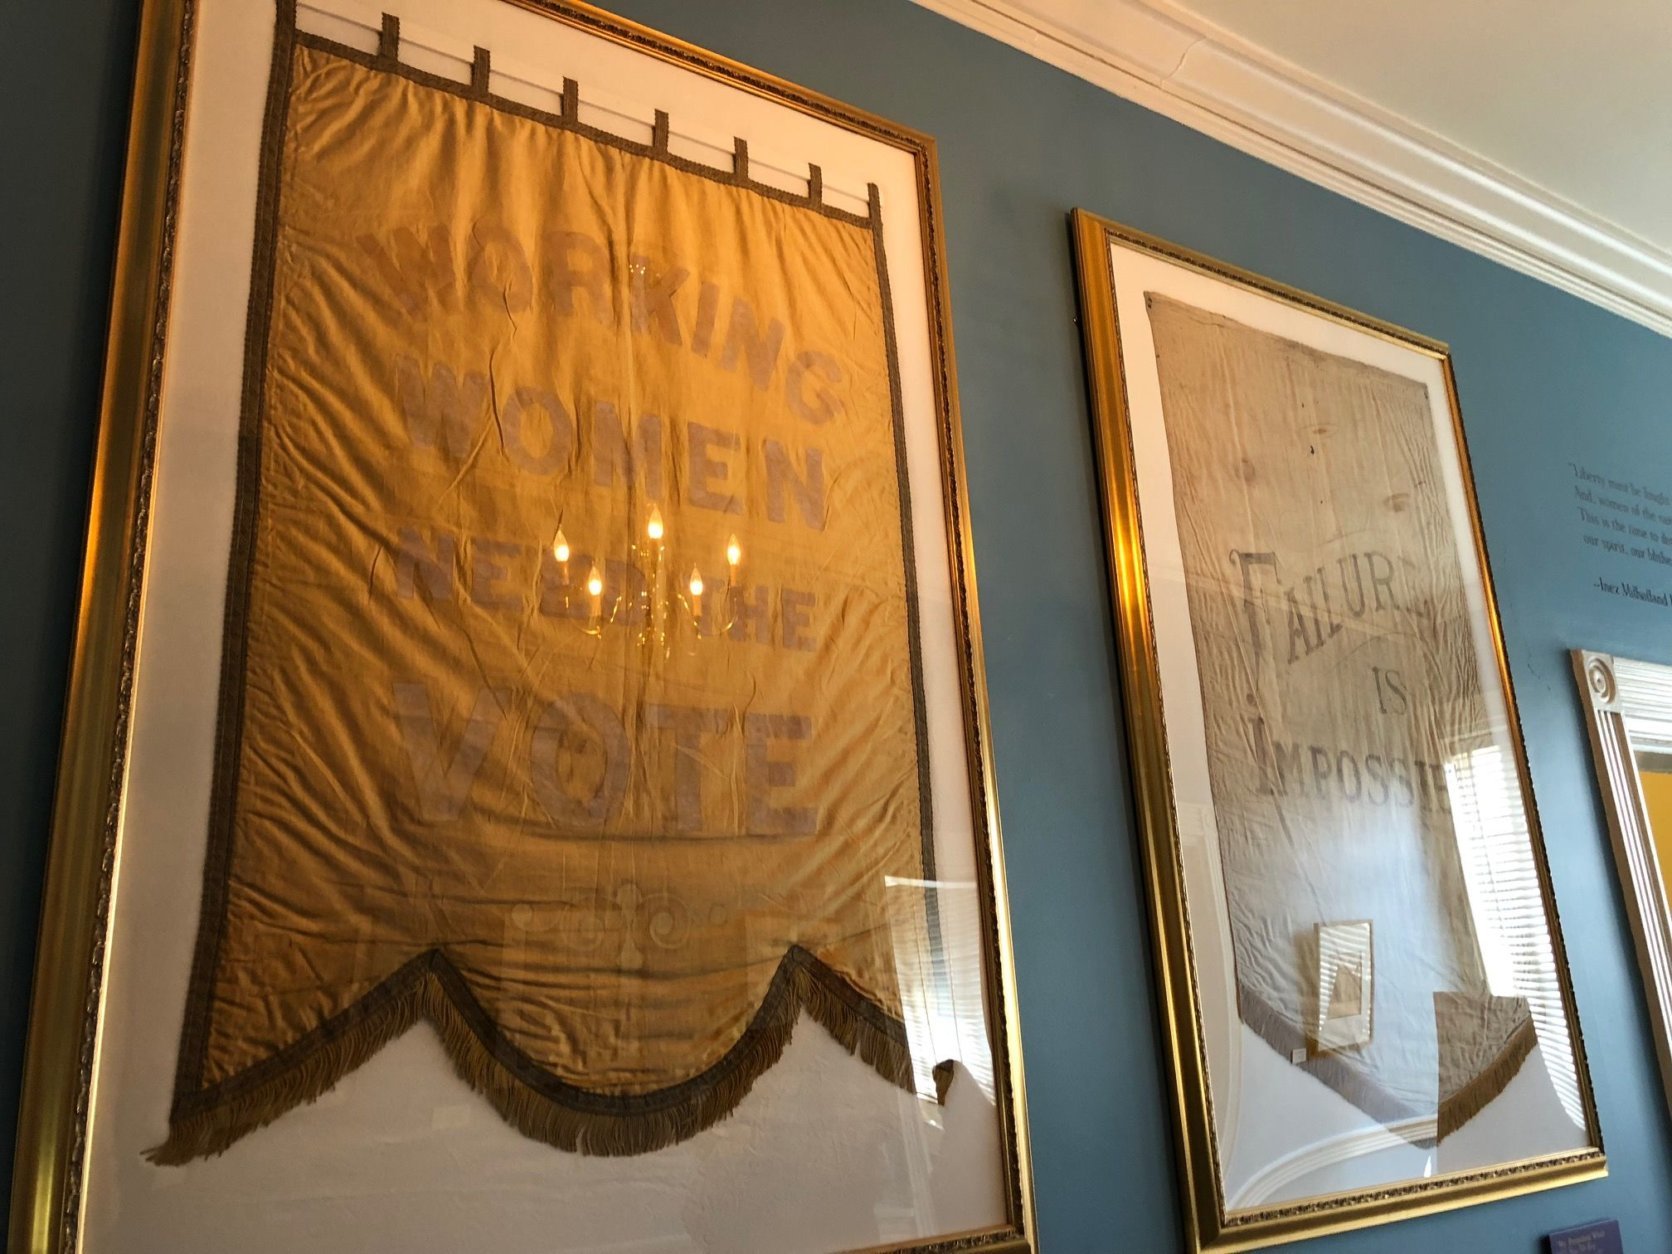 Banners from a 1913 march held a day before Woodrow Wilson's inauguration decorate the wall. The 19th Amendment, which women the right to vote, was ratified on August 26, 1920. 